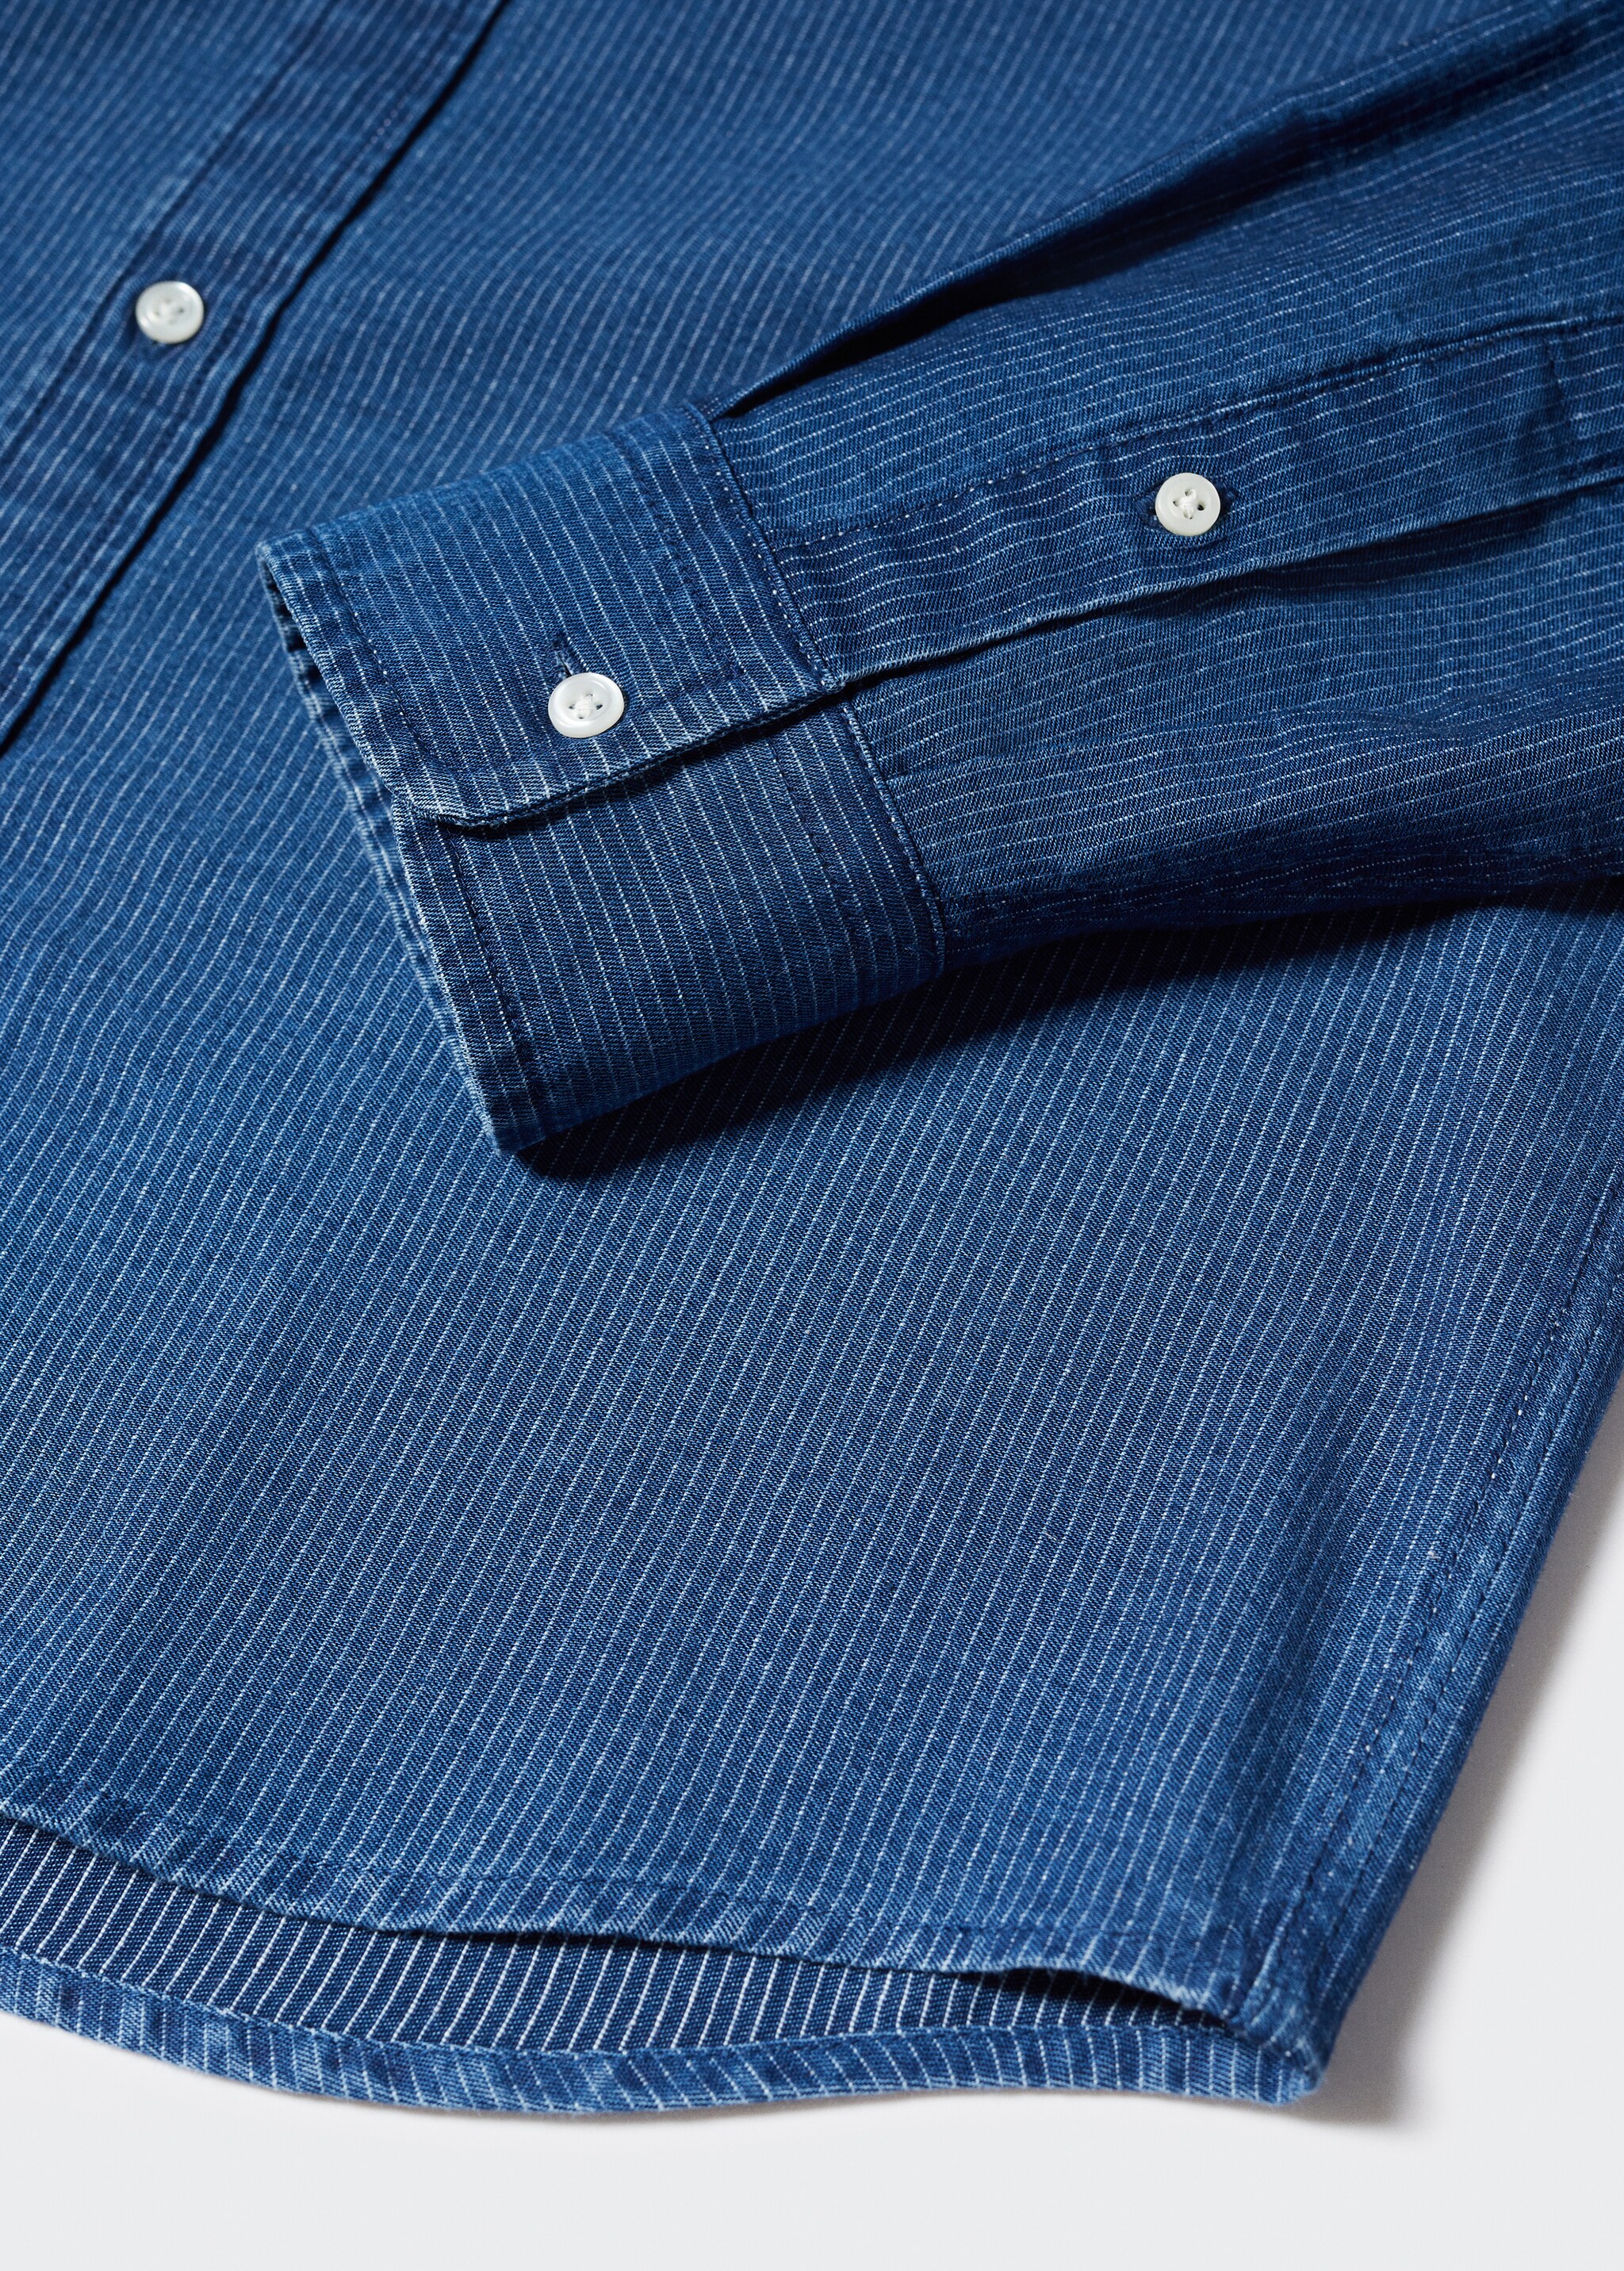 Striped denim shirt - Details of the article 8